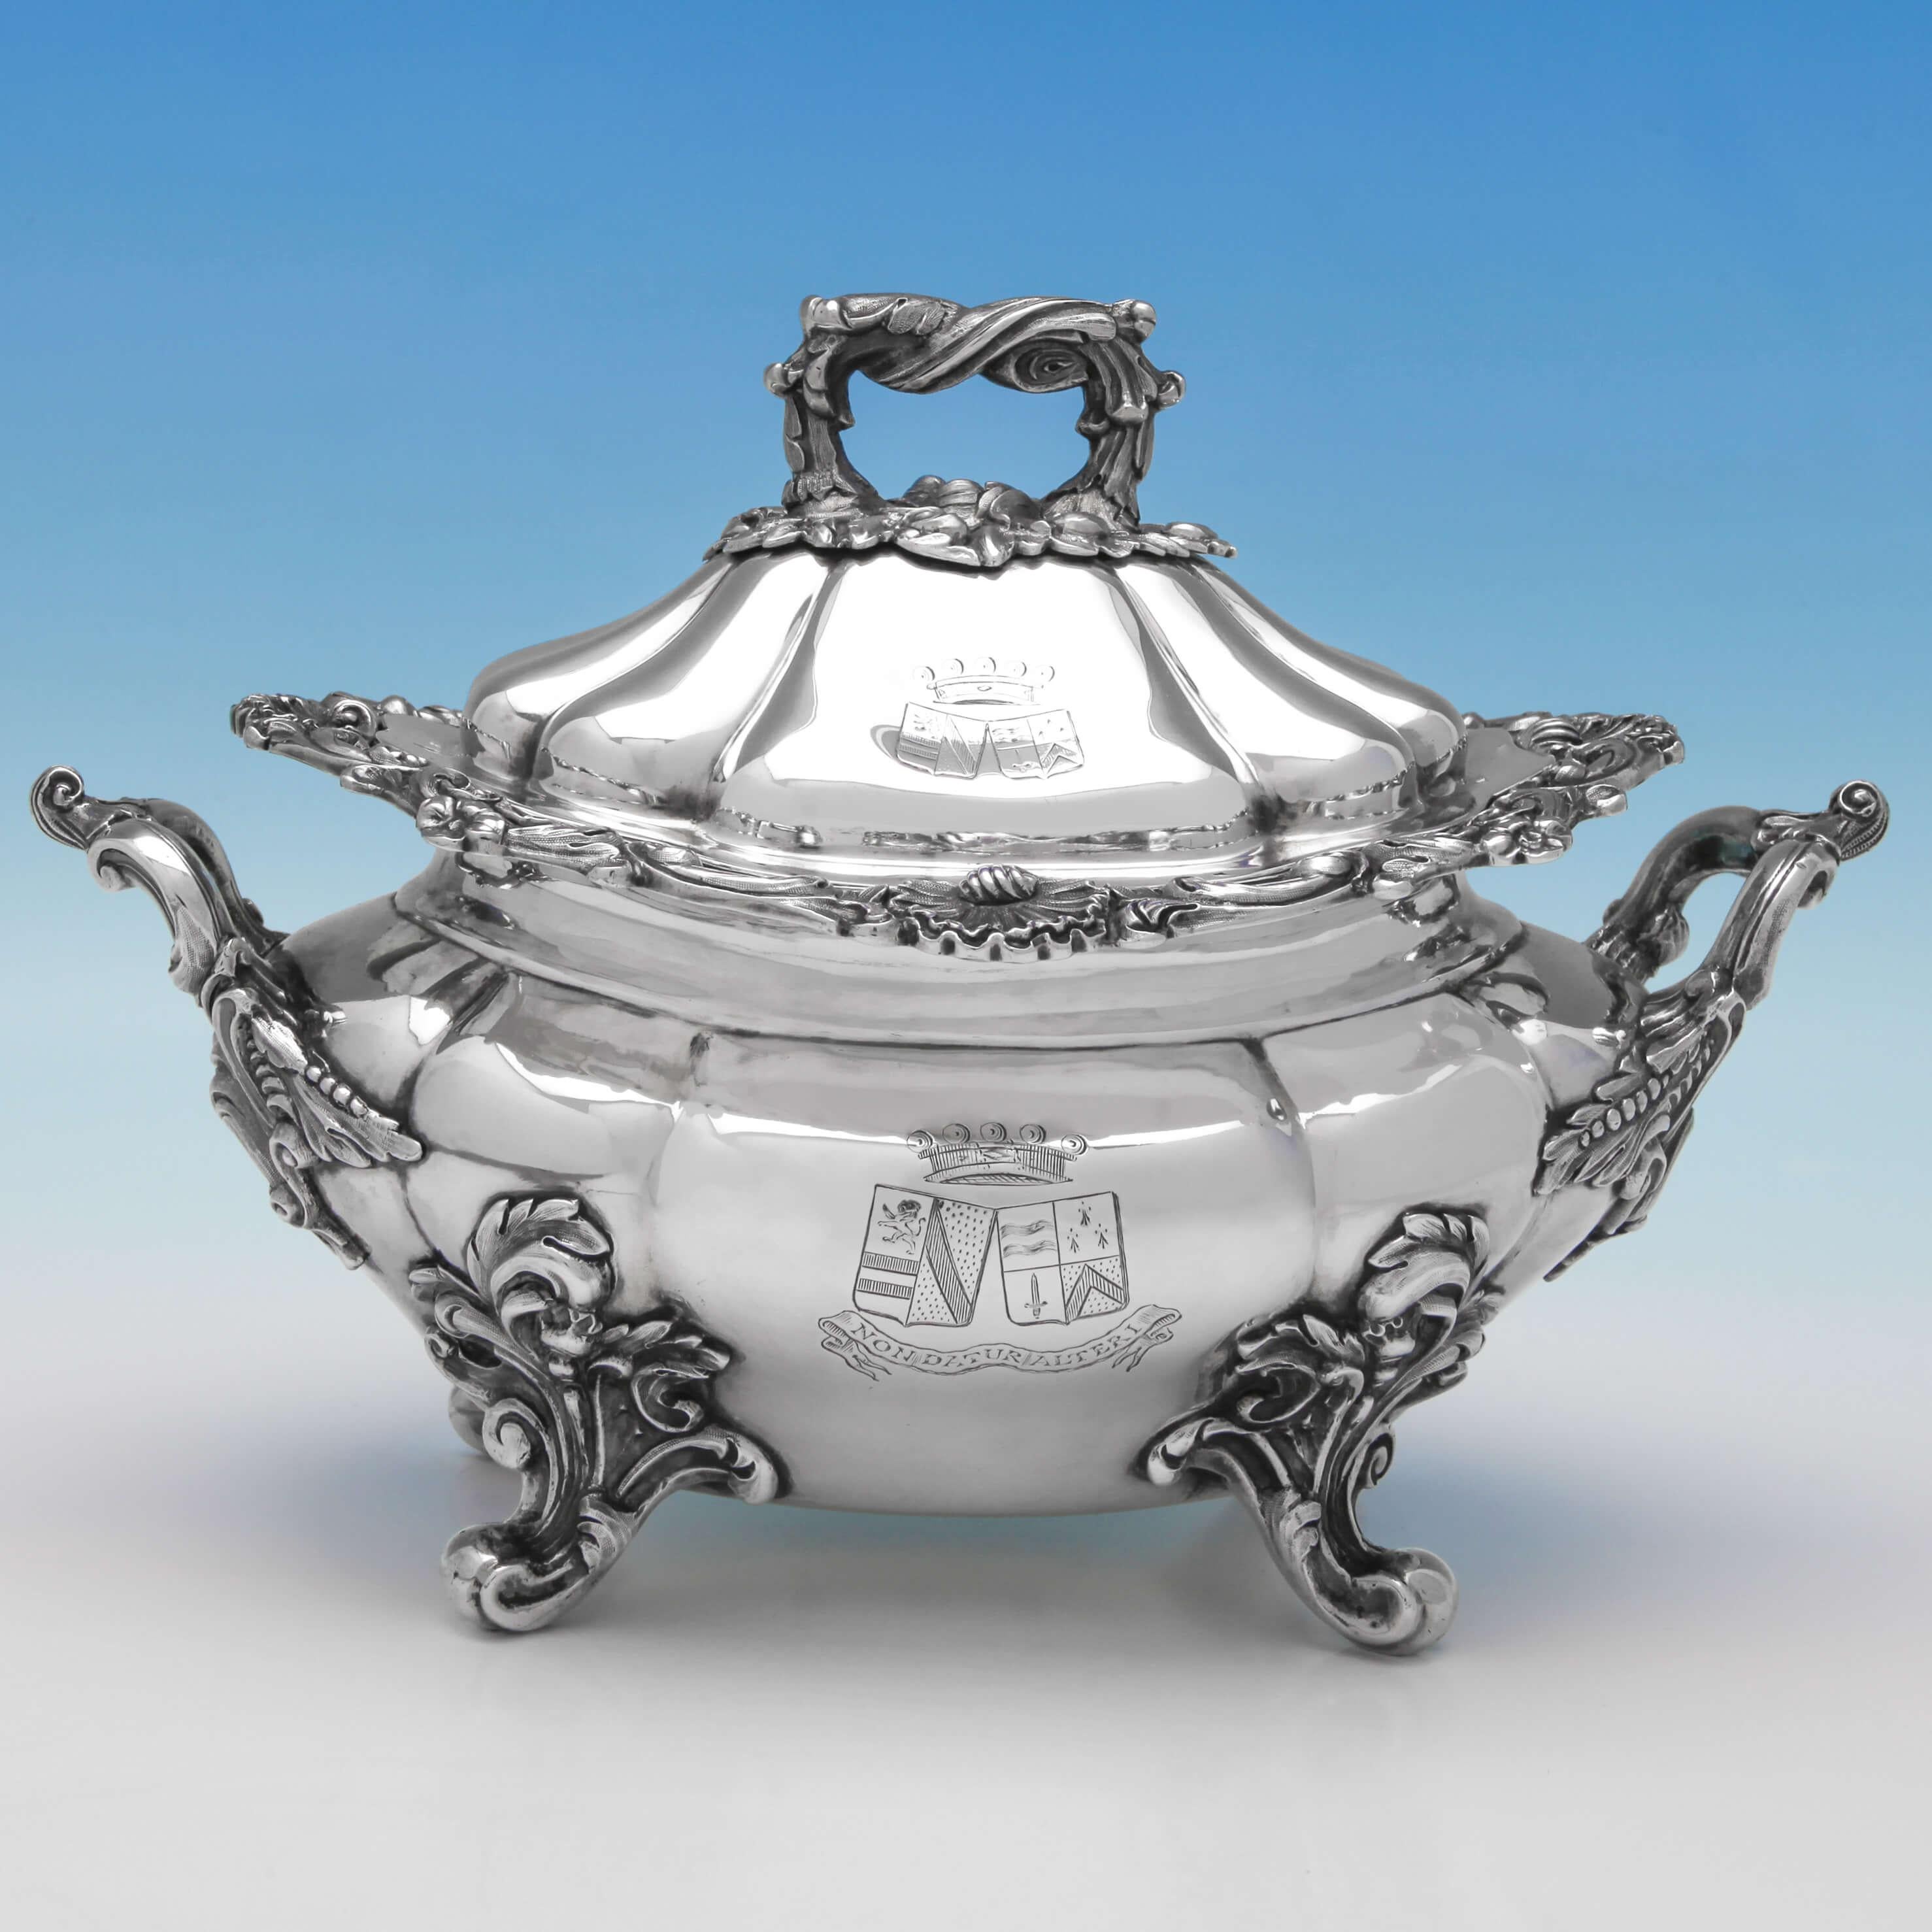 Hallmarked in London in 1842 by John Figg, this extraordinary pair of Victorian, antique sterling silver Sauce Tureens, feature scroll borders, ornate handles and feet, and engraved crests and mottos. Each sauce tureen measures 7